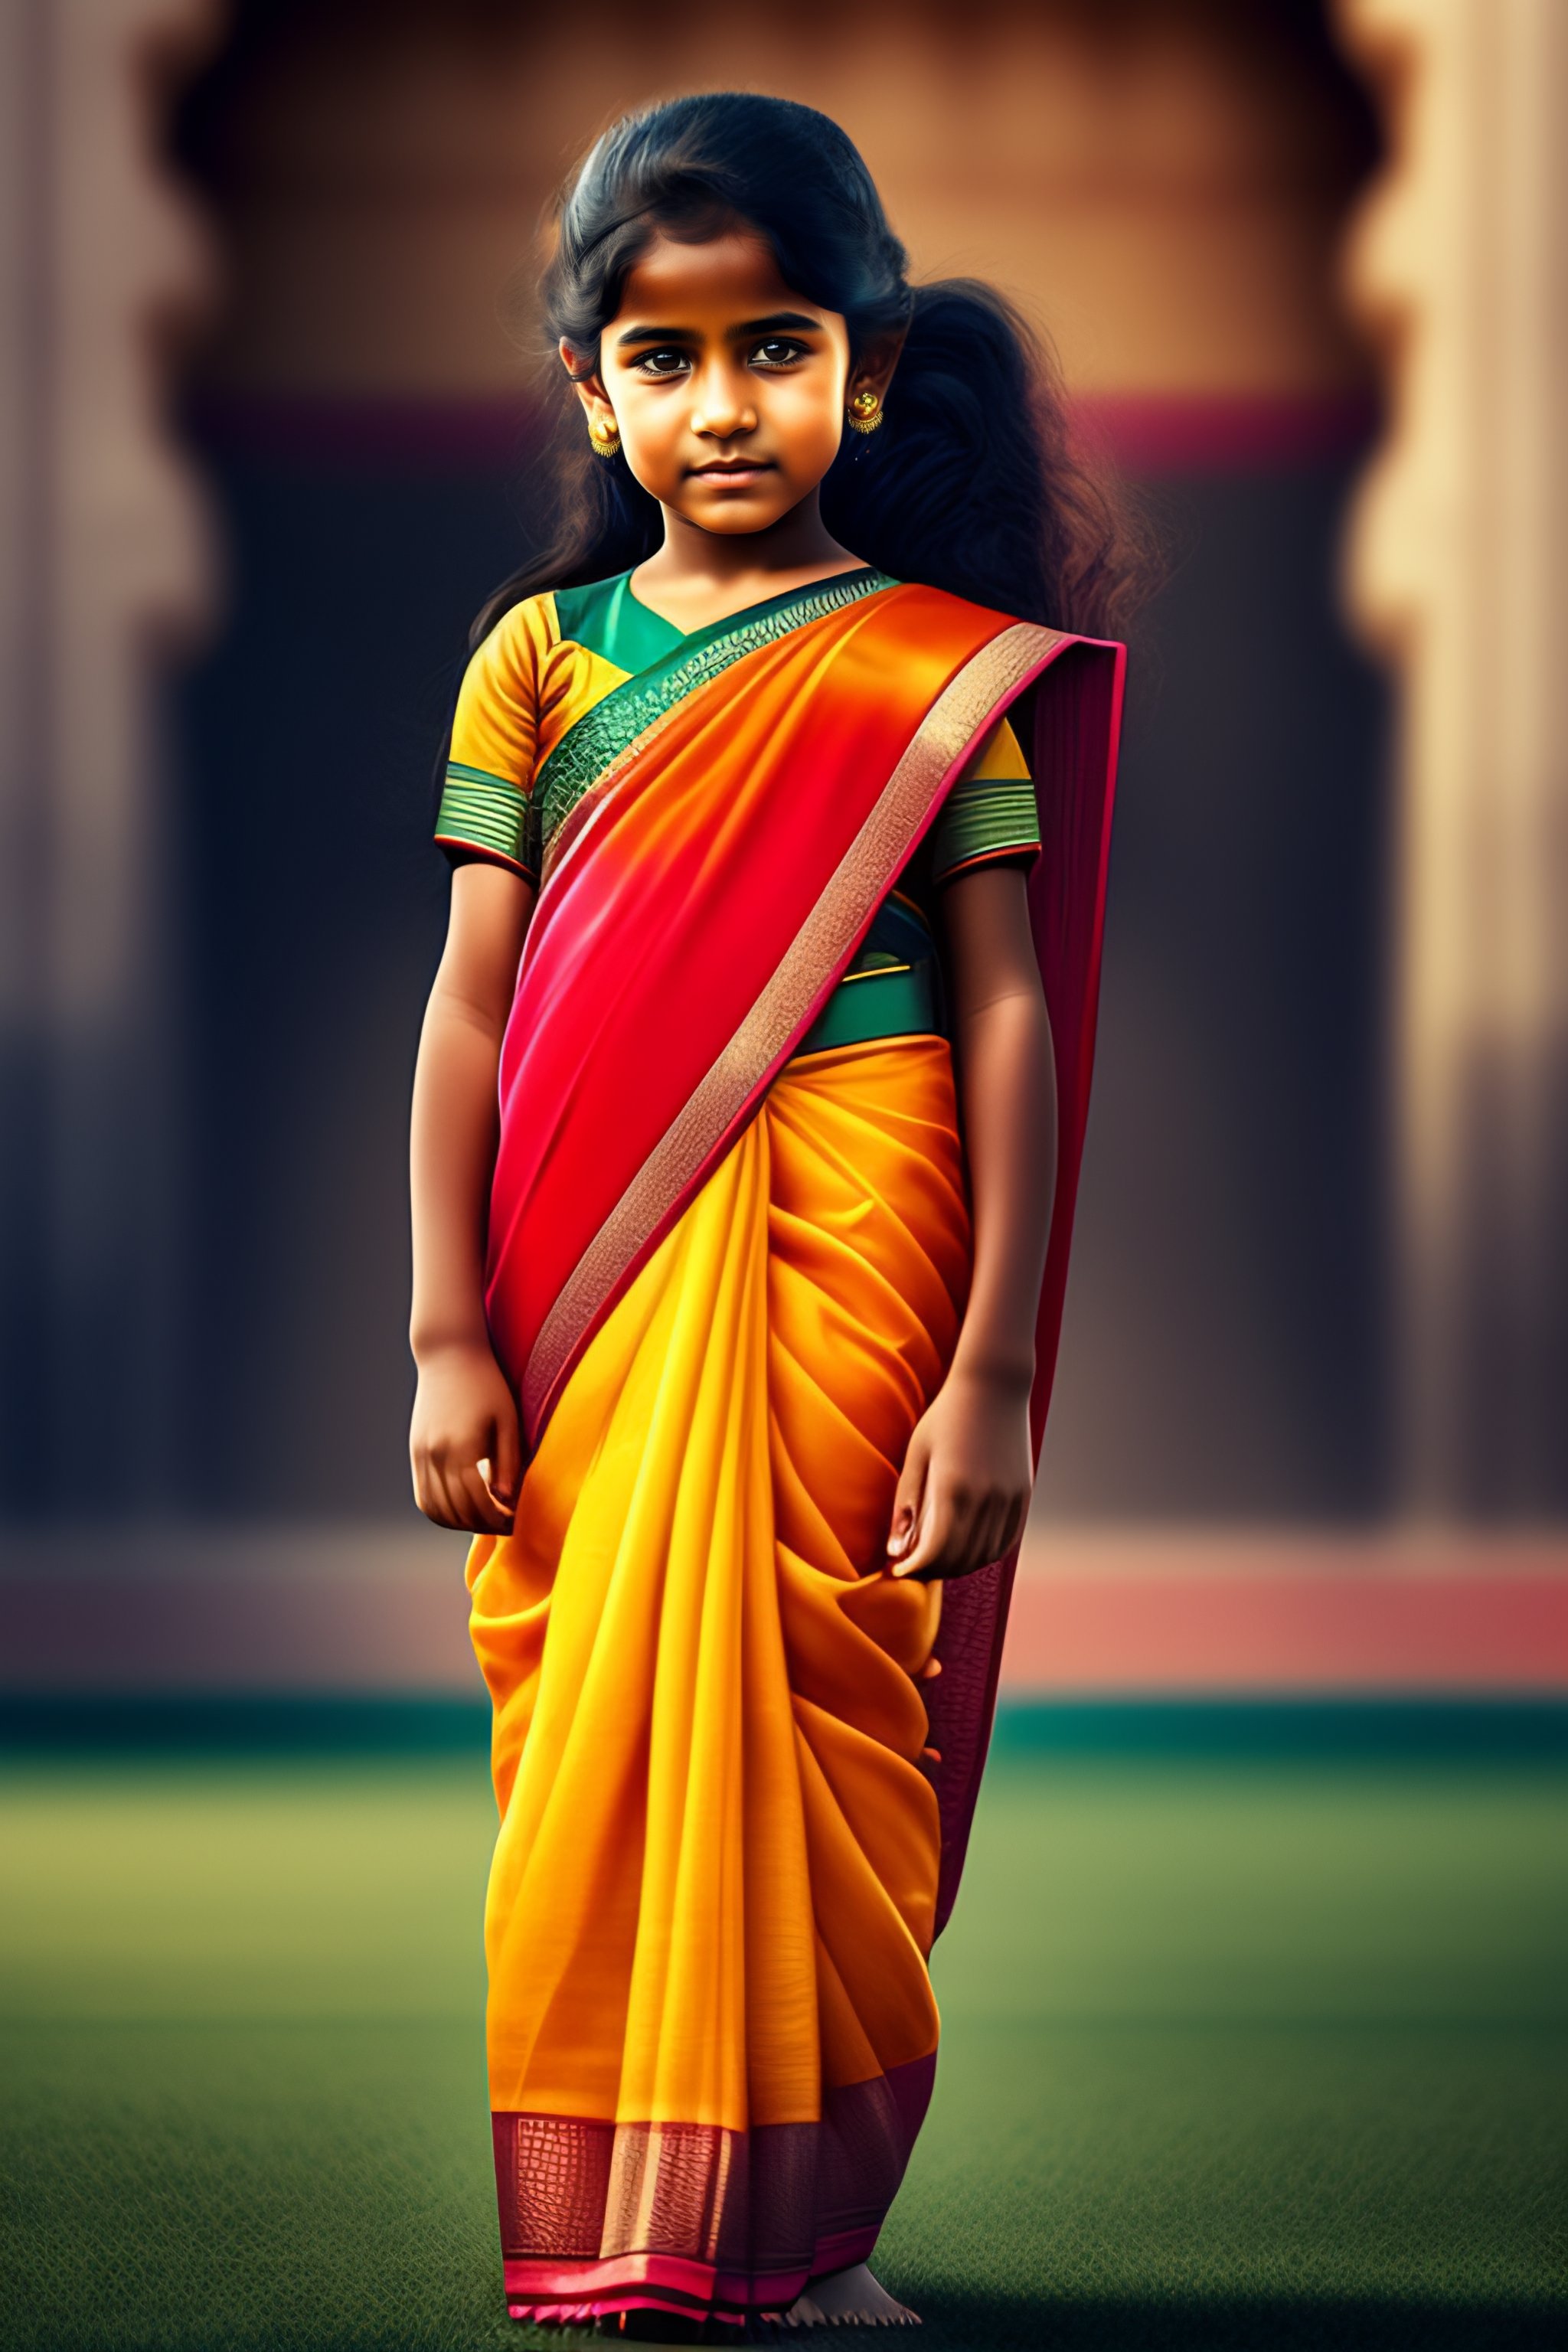 Lexica - A young girl wearing saree and playing football